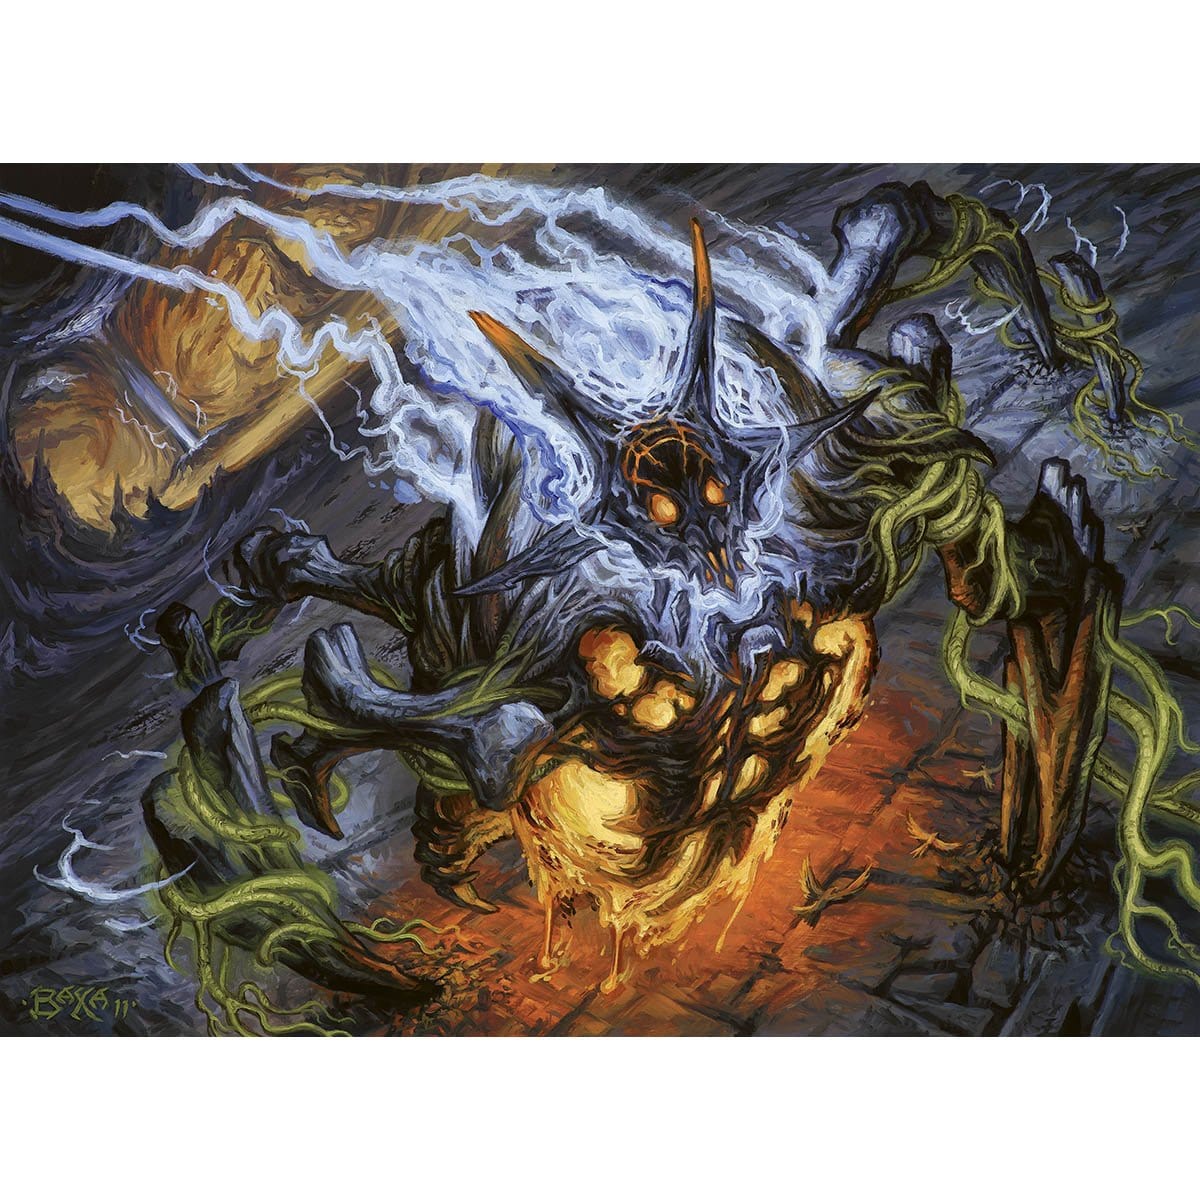 Maelstrom Wanderer Print - Print - Original Magic Art - Accessories for Magic the Gathering and other card games